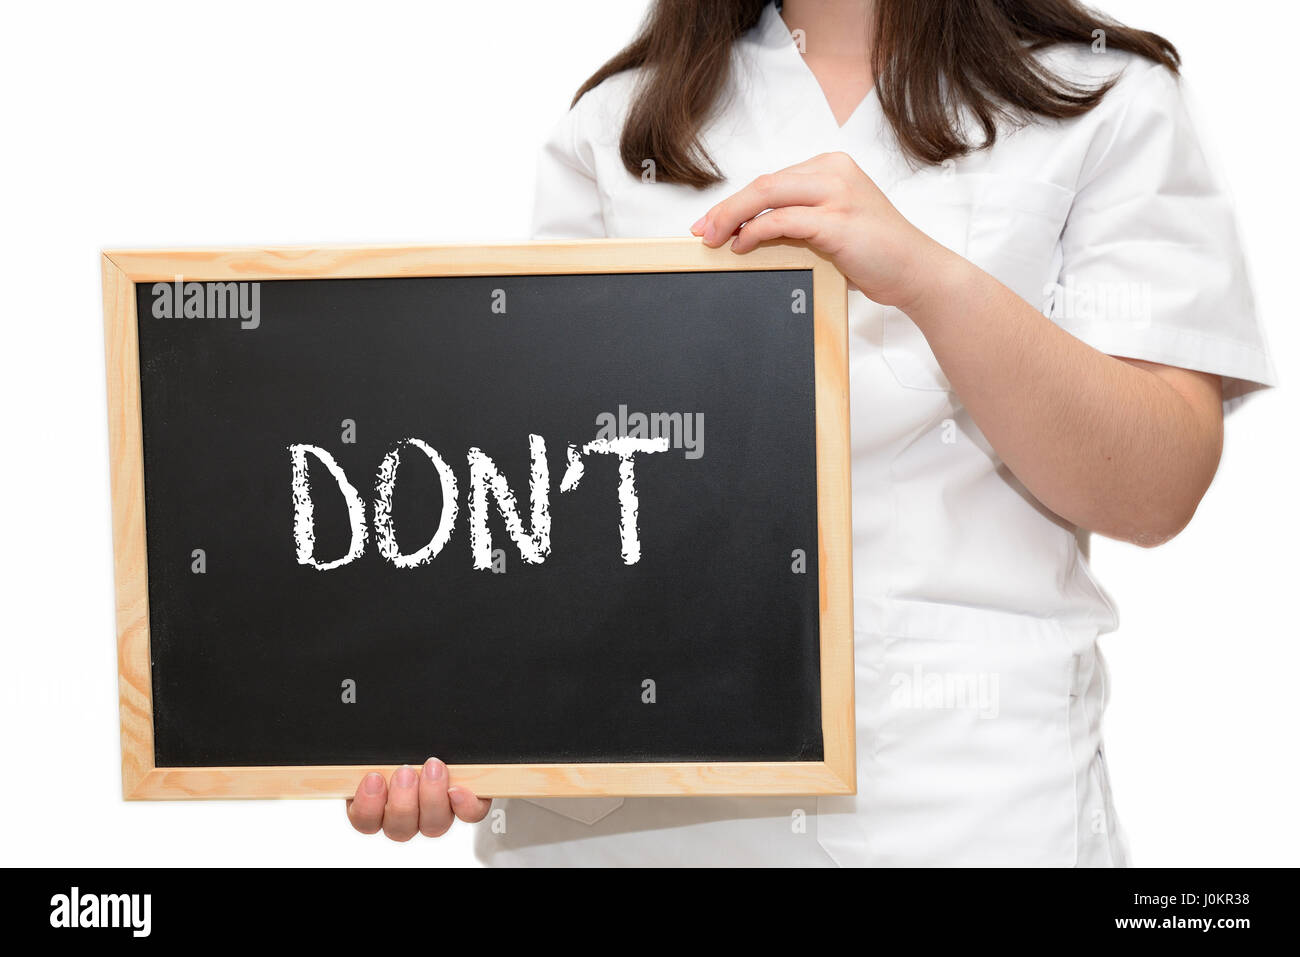 Female nurse holding a slate board with the text Don't written with chalk, isolated on white background. Stock Photo